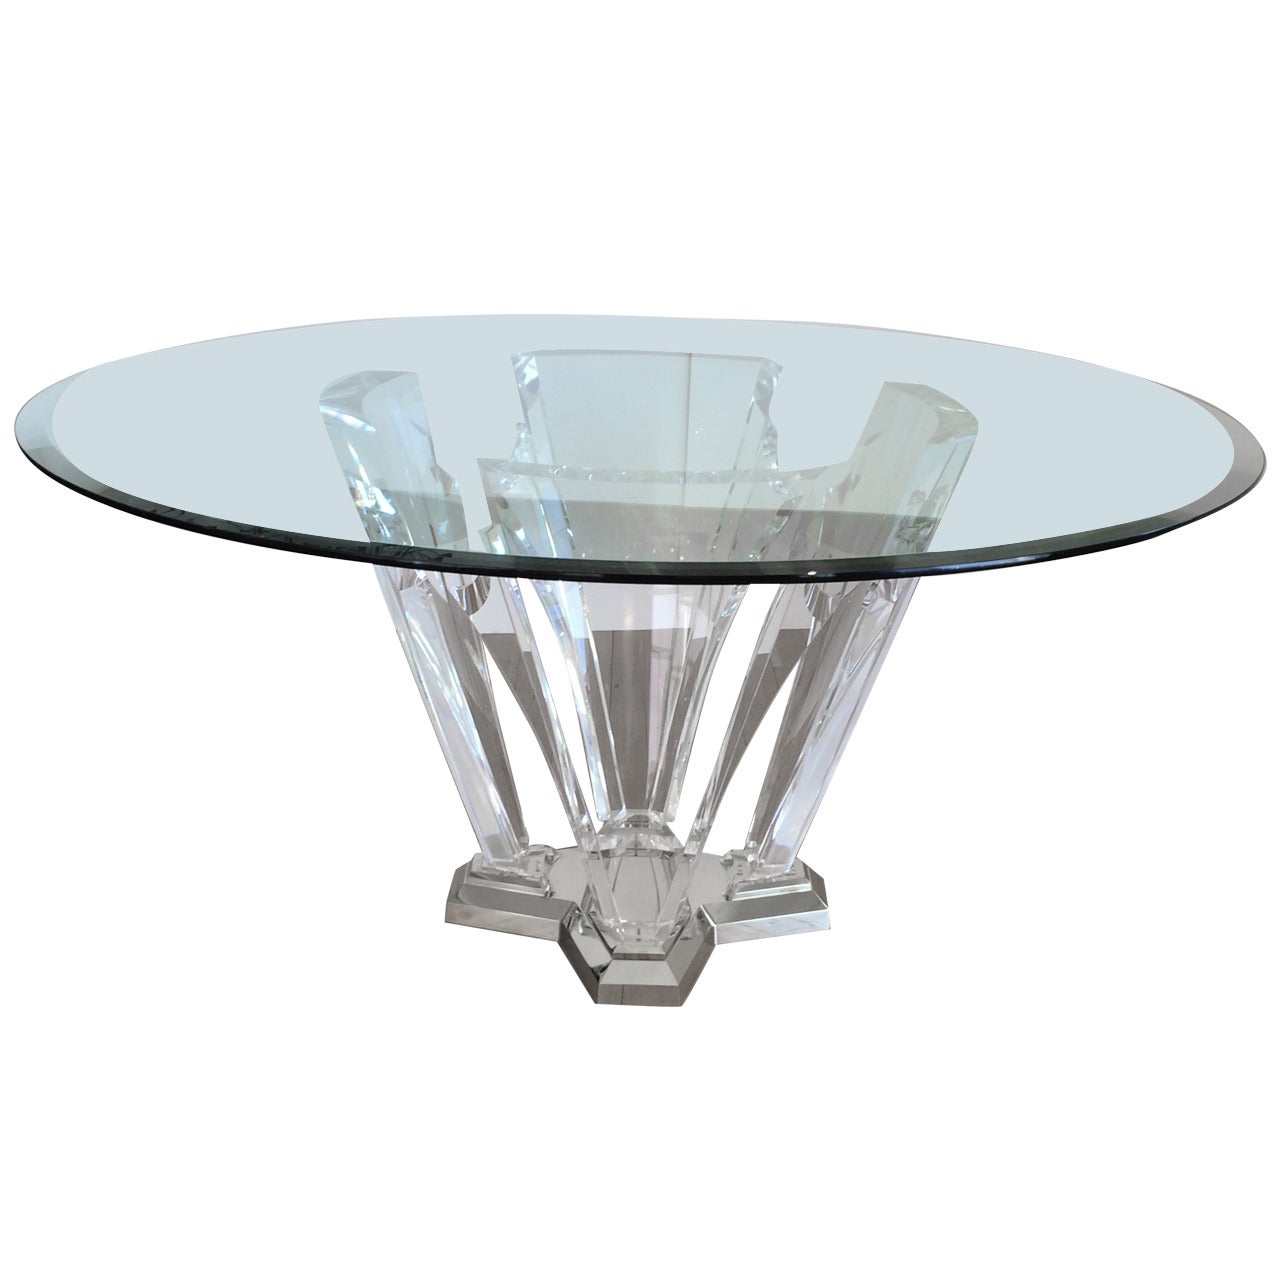 Acrylic and Polished Brass Dining Table by Spectrum Limited